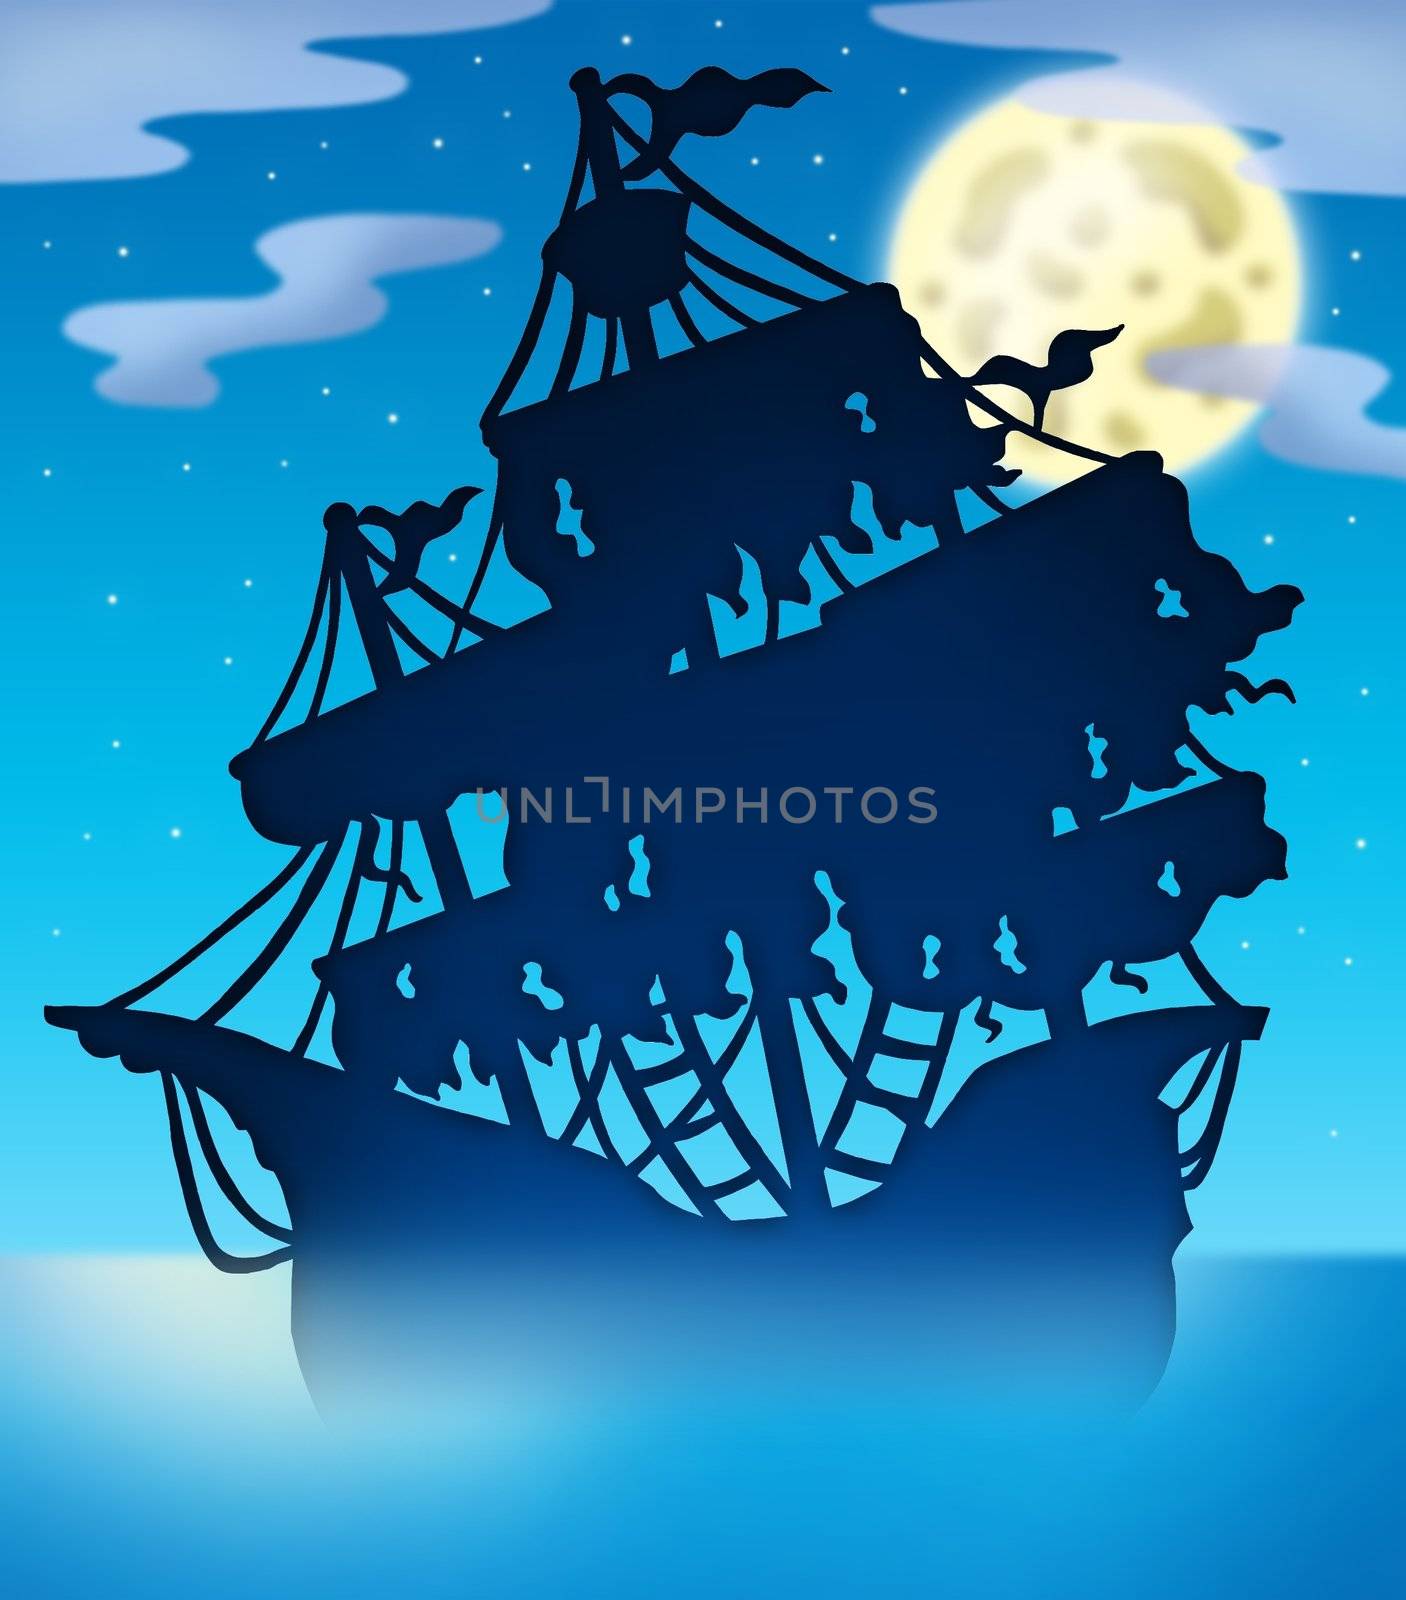 Mysterious ship silhouette at night - color illustration.